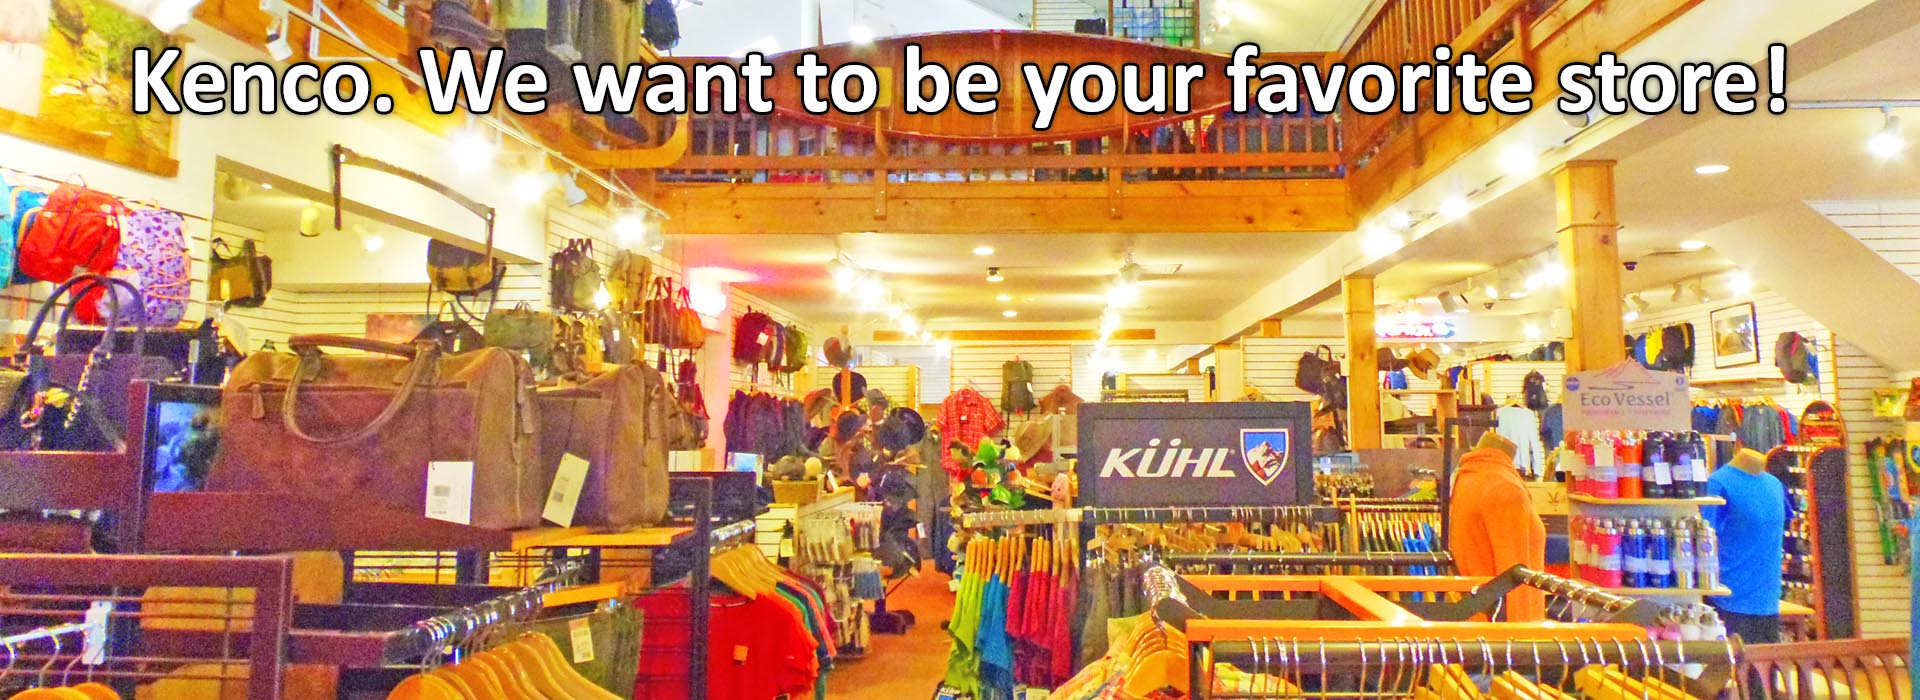 Kenco. We want to be your favorite store! Image description: The Kenco Outfitters main floor showroom. There are racks of clothing, water bottls, hats, backpacks, leather duffel bags, and waxed canvas bags visible. The upper floor of the store is slightly visible at the top of the image with a canoe mounted to the railing above straight ahead, and chest waders hanging from the railing to the left. The store is well lit and has white slatwalls with natural wood accents